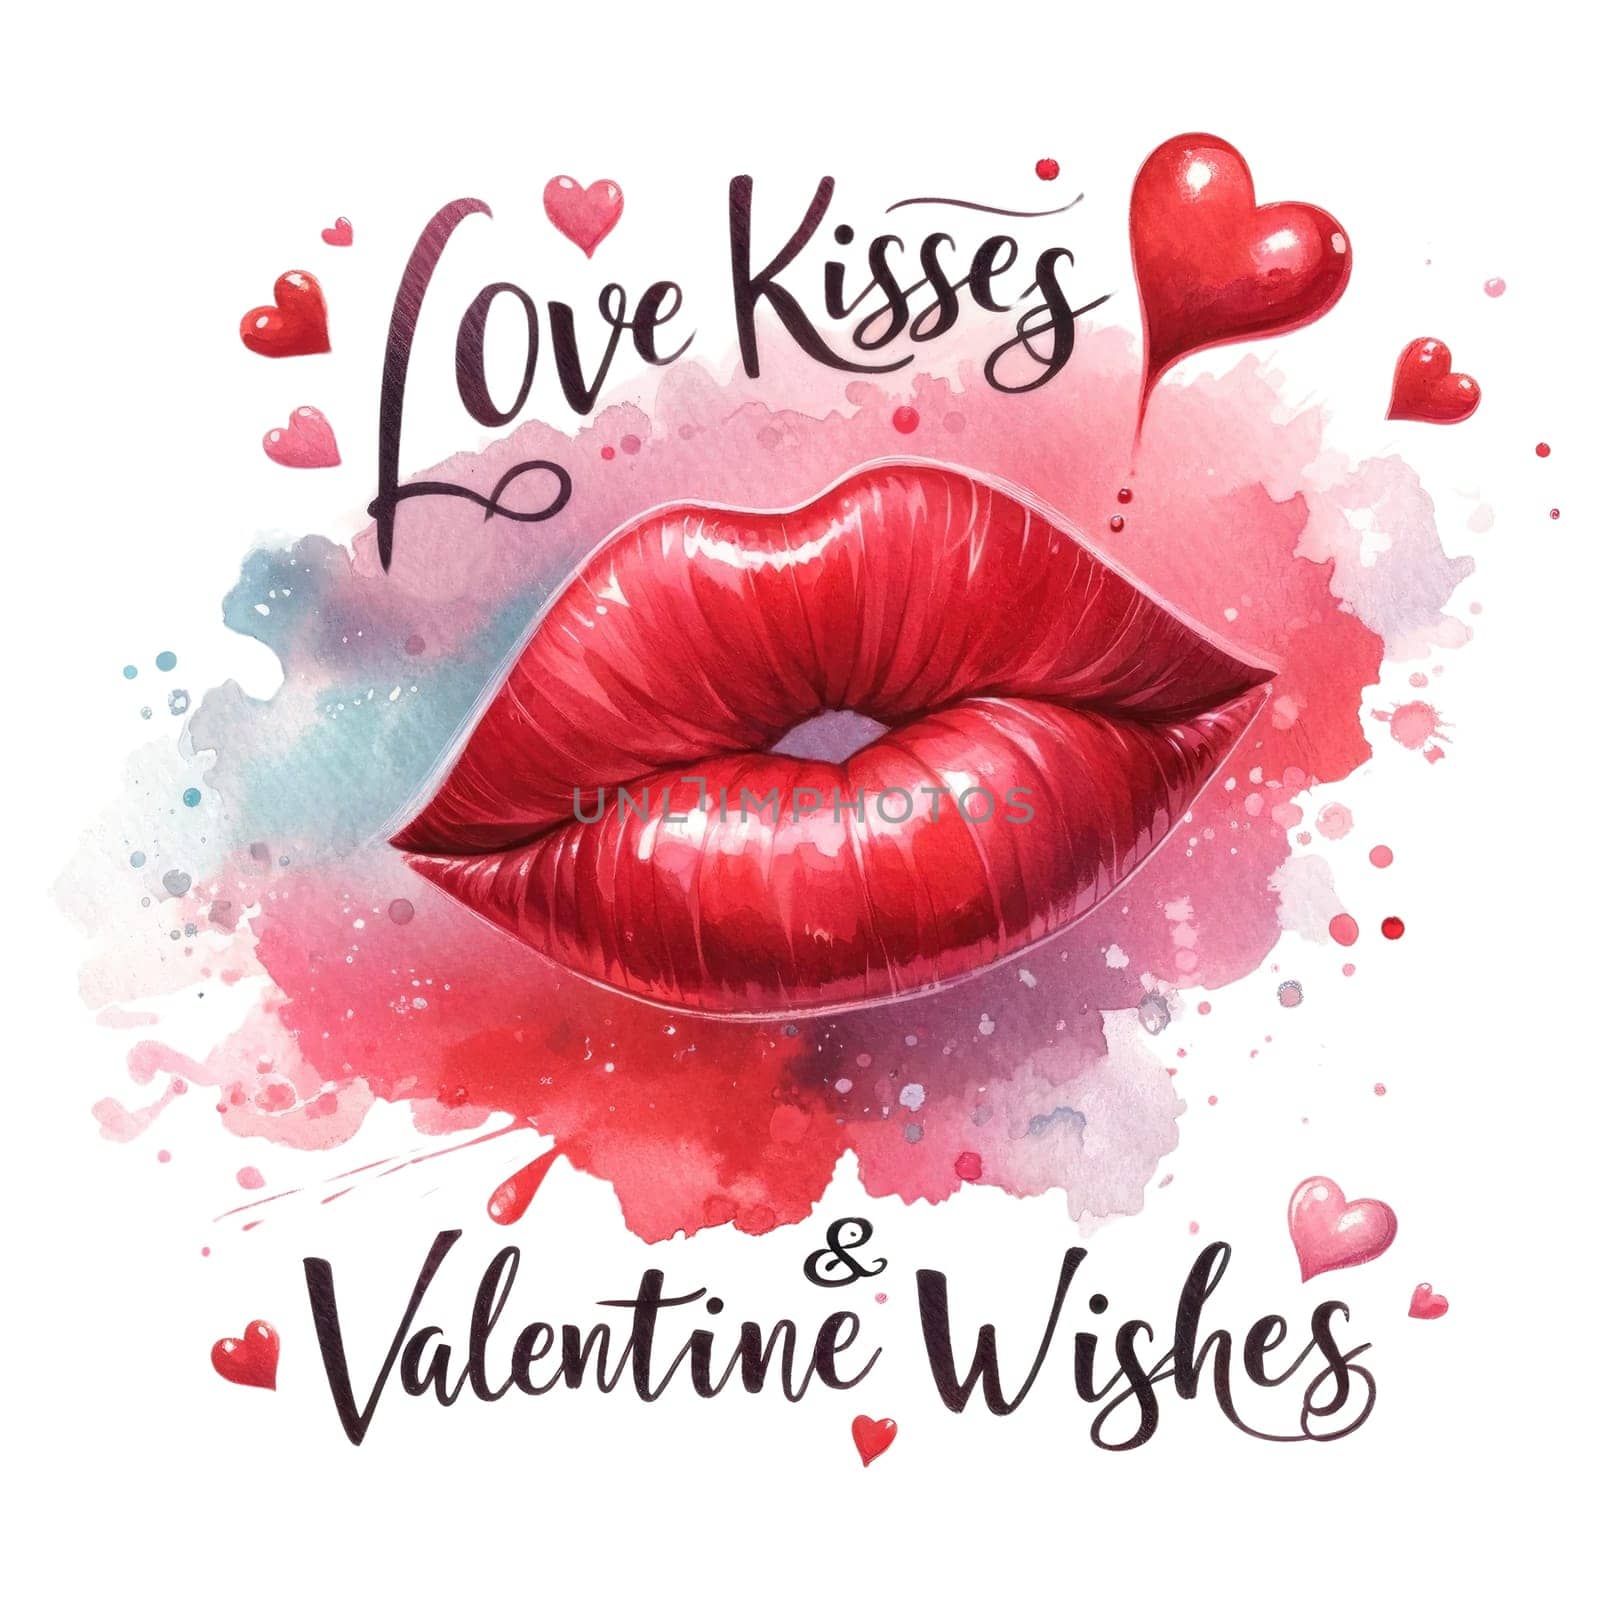 Valentines day watercolor illustration isolated for sweet clipart graphic design for print romantic greeting or invitation card or gift for holiday celebration. Vellichor.